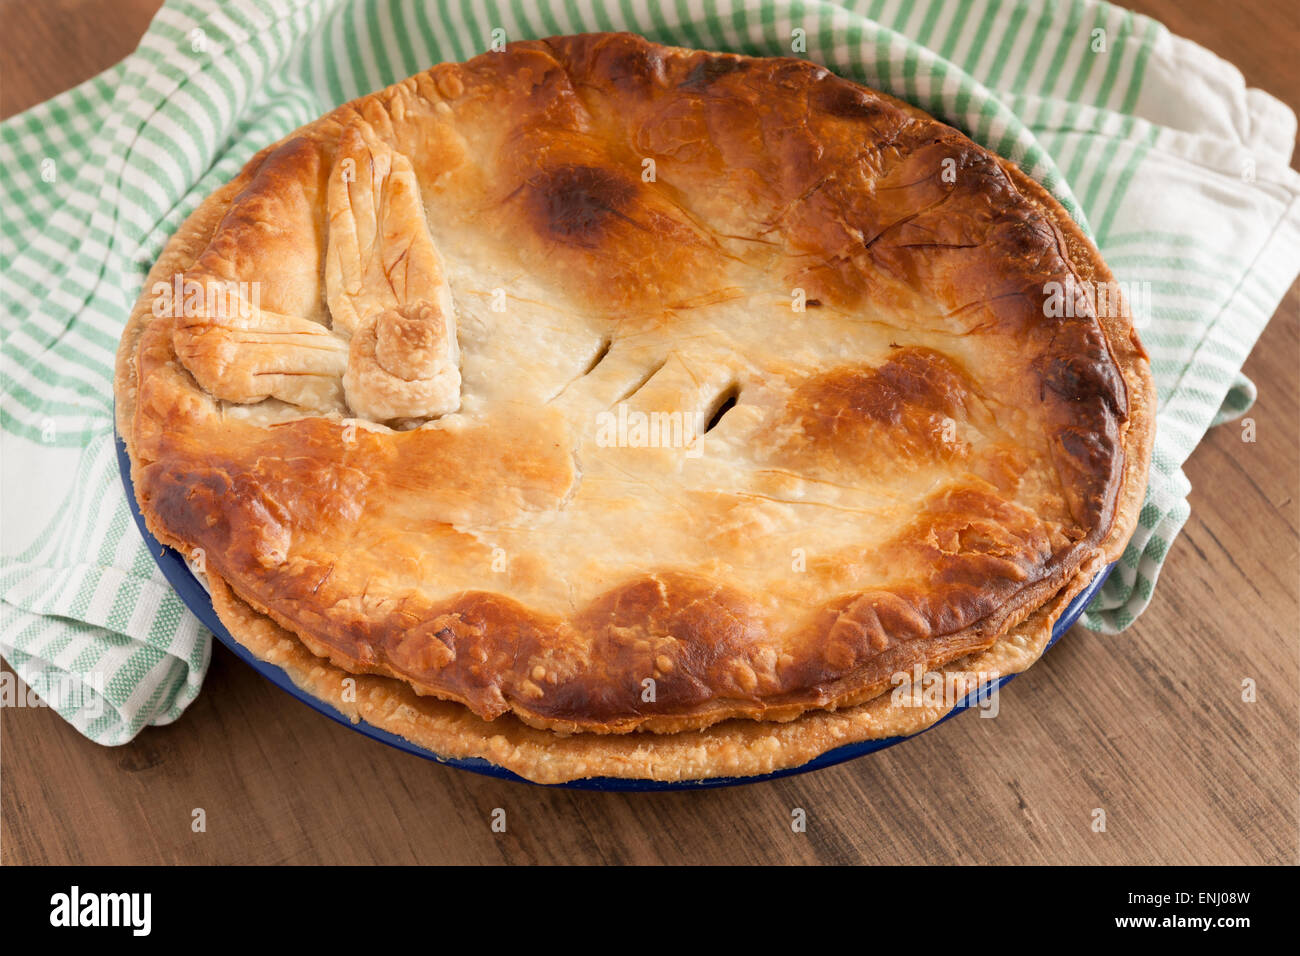 Home baked pie with a golden puff pastry crust baked in enamelware pie dish can be used for savory or sweet fillings Stock Photo